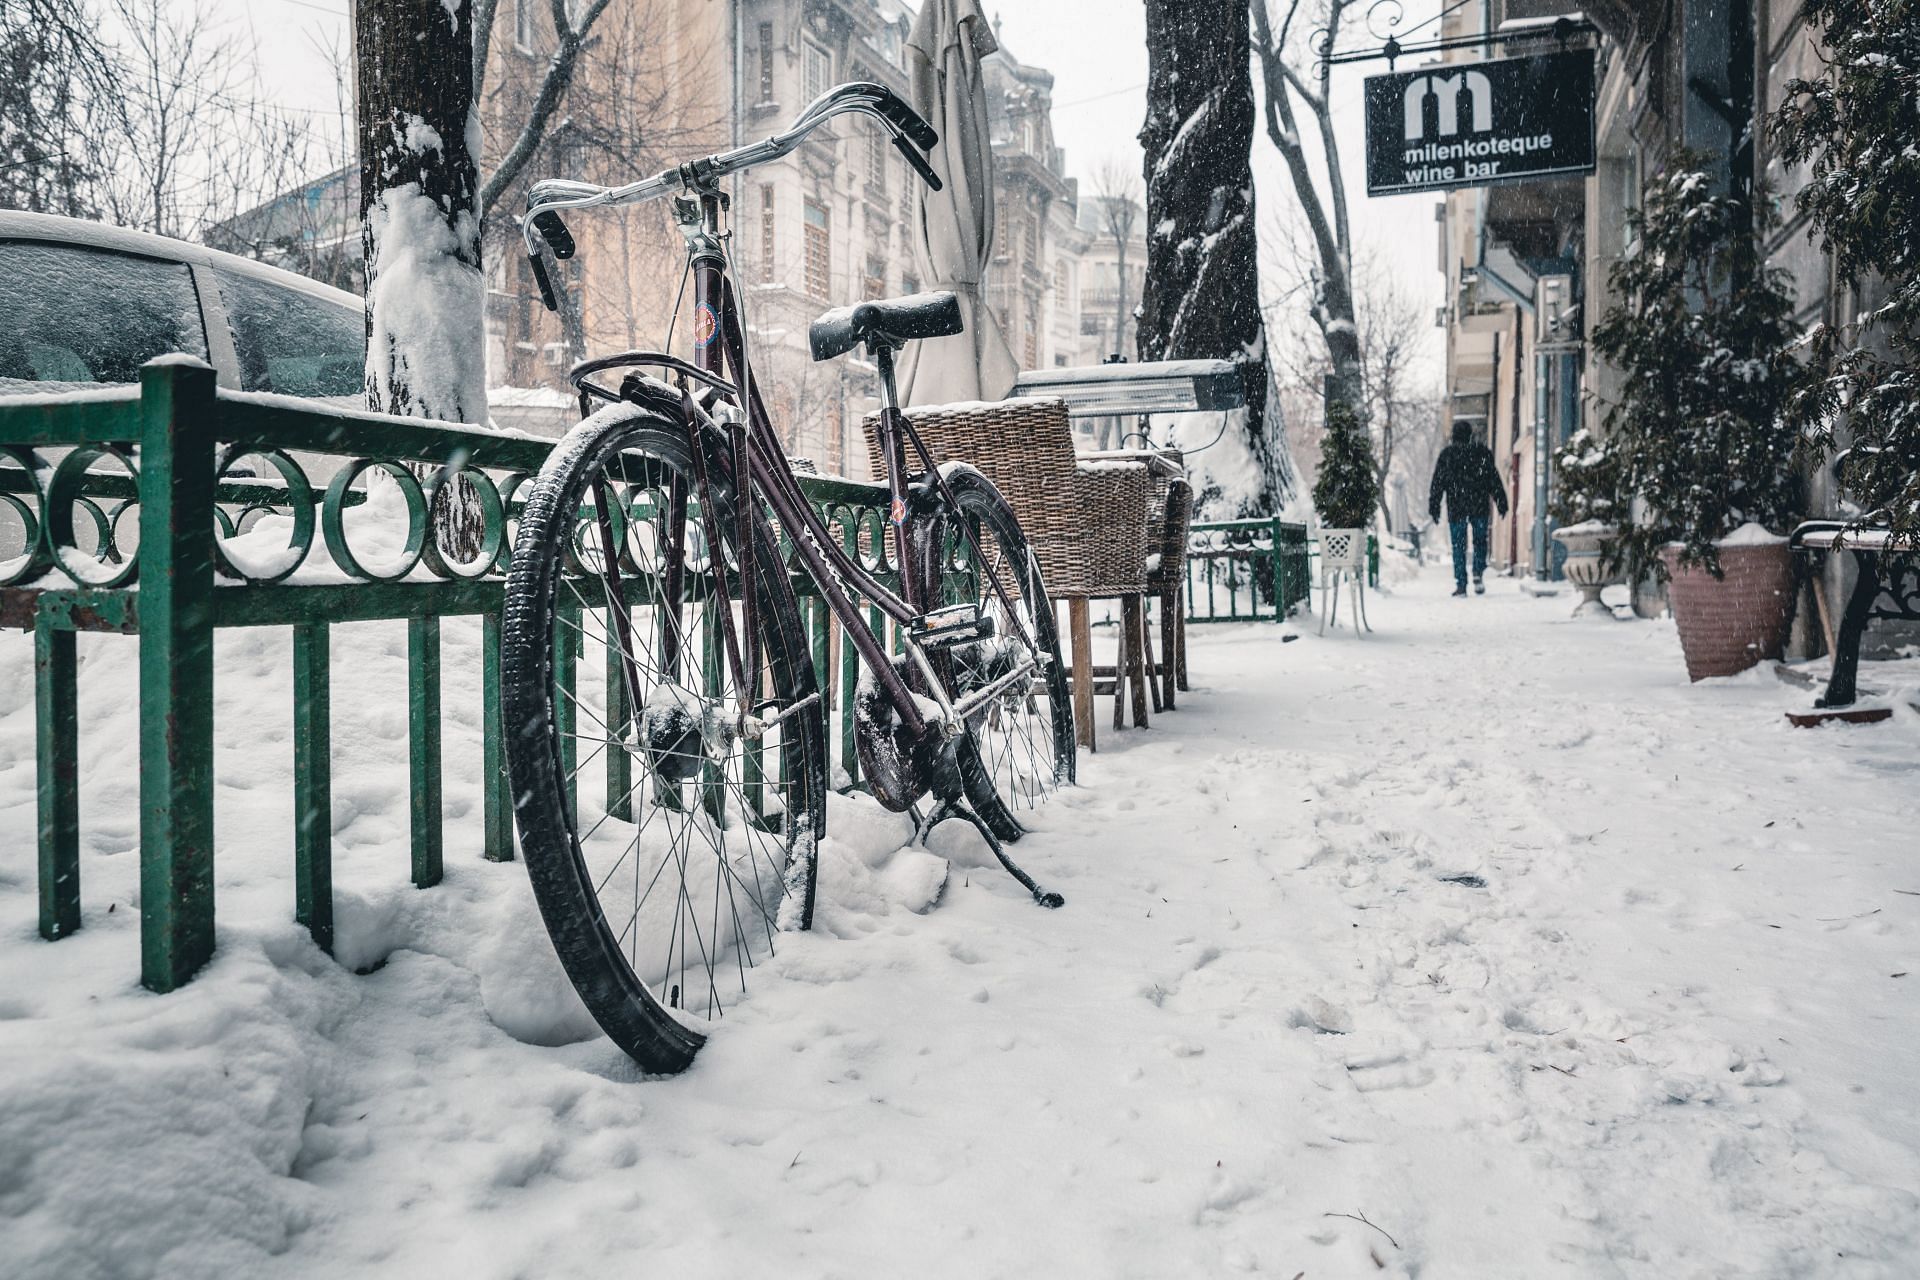 Risk of heart attacks in cold weather (image sourced via Pexels / Photo by dave)